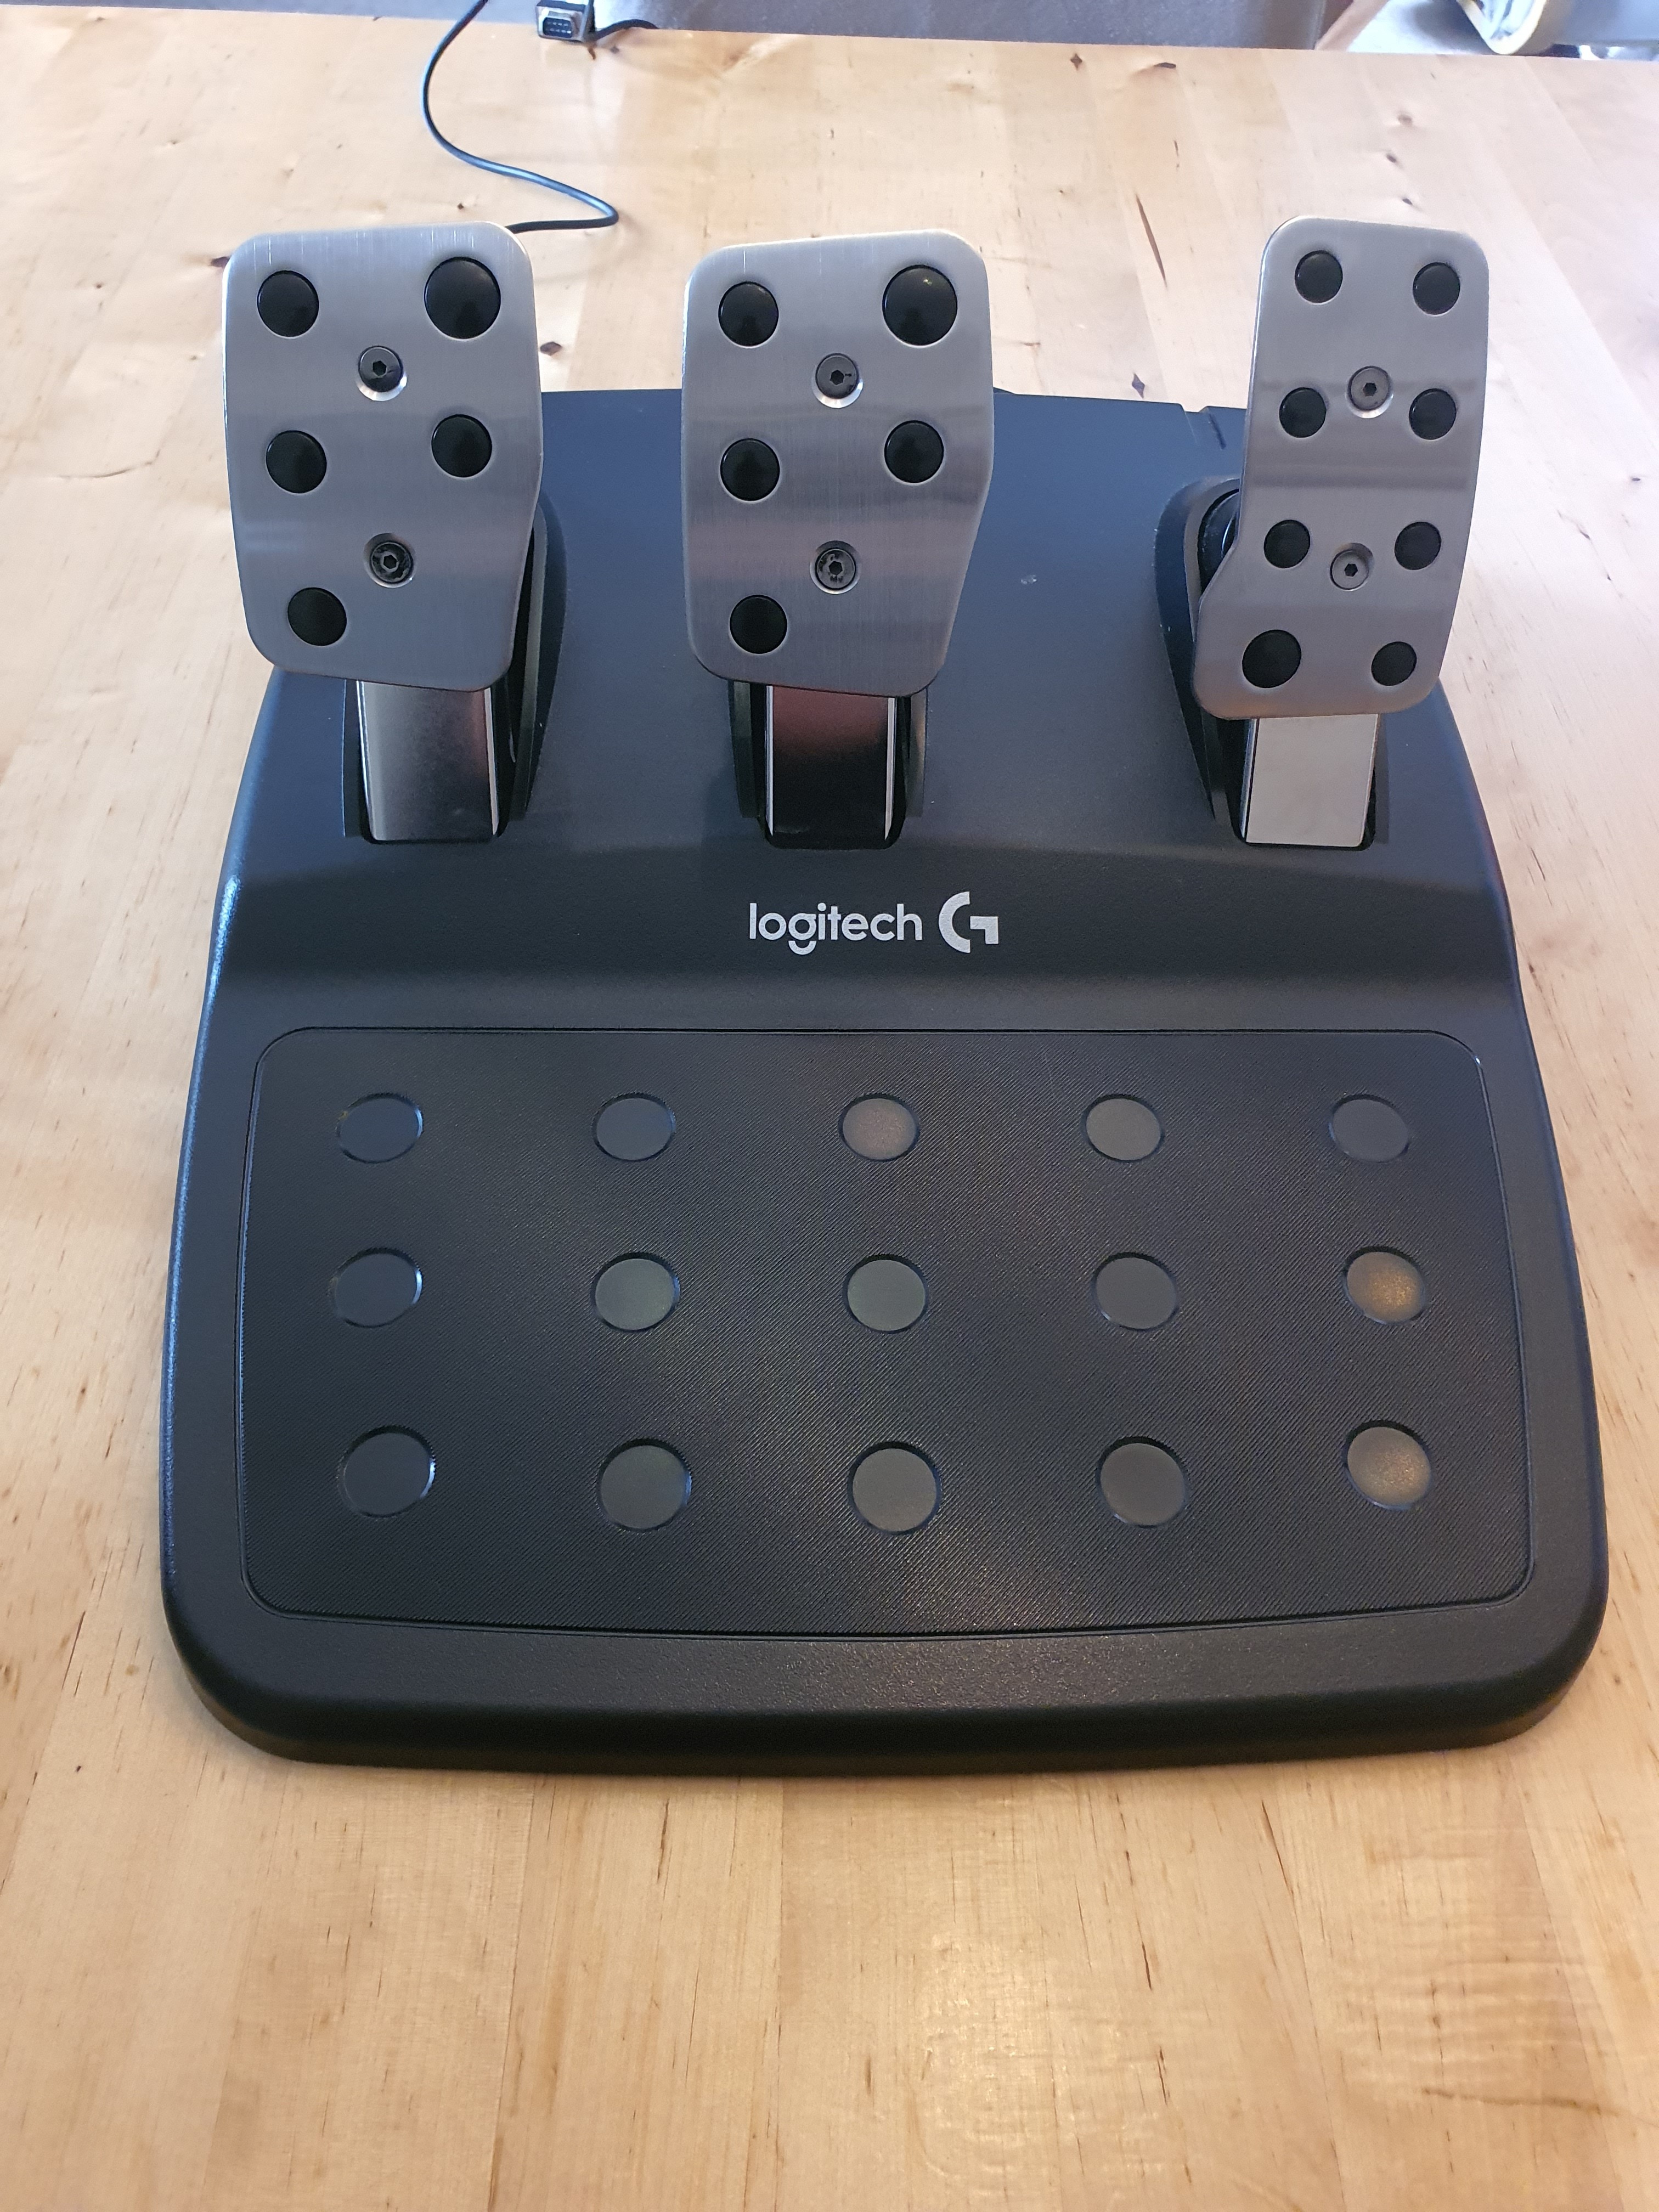 Pedals from the Logitech G920 set